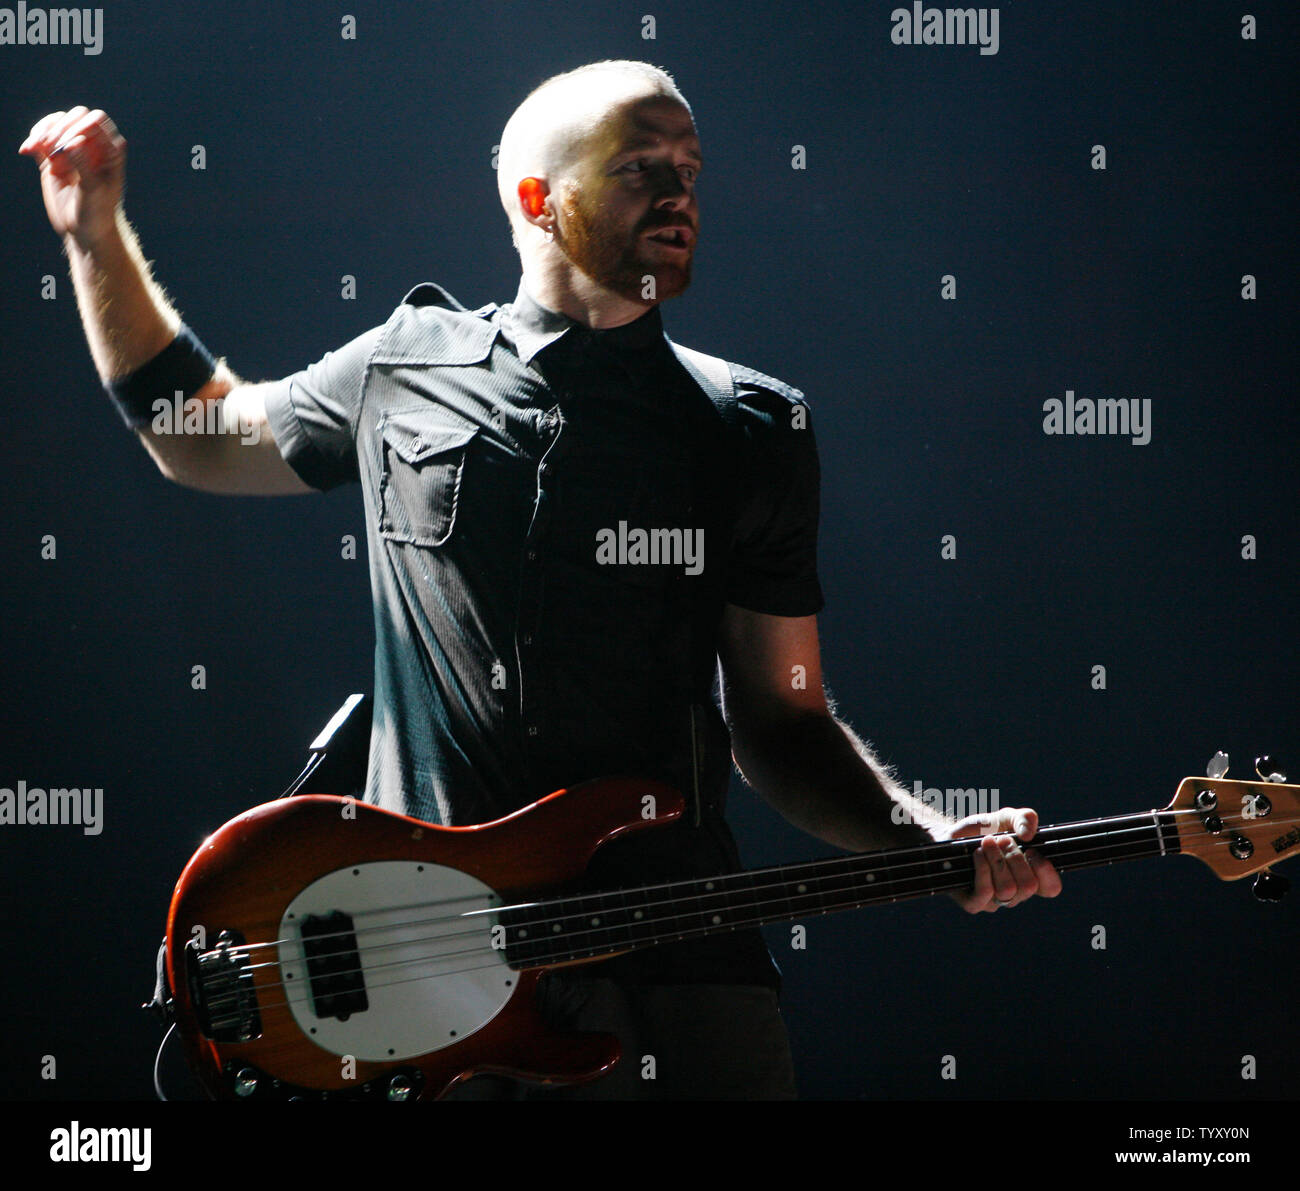 Bass player David Micheal Farrell of the band Linkin Park performs in concert at Bercy in Paris on May 30, 2007.   (UPI Photo/David Silpa) Stock Photo